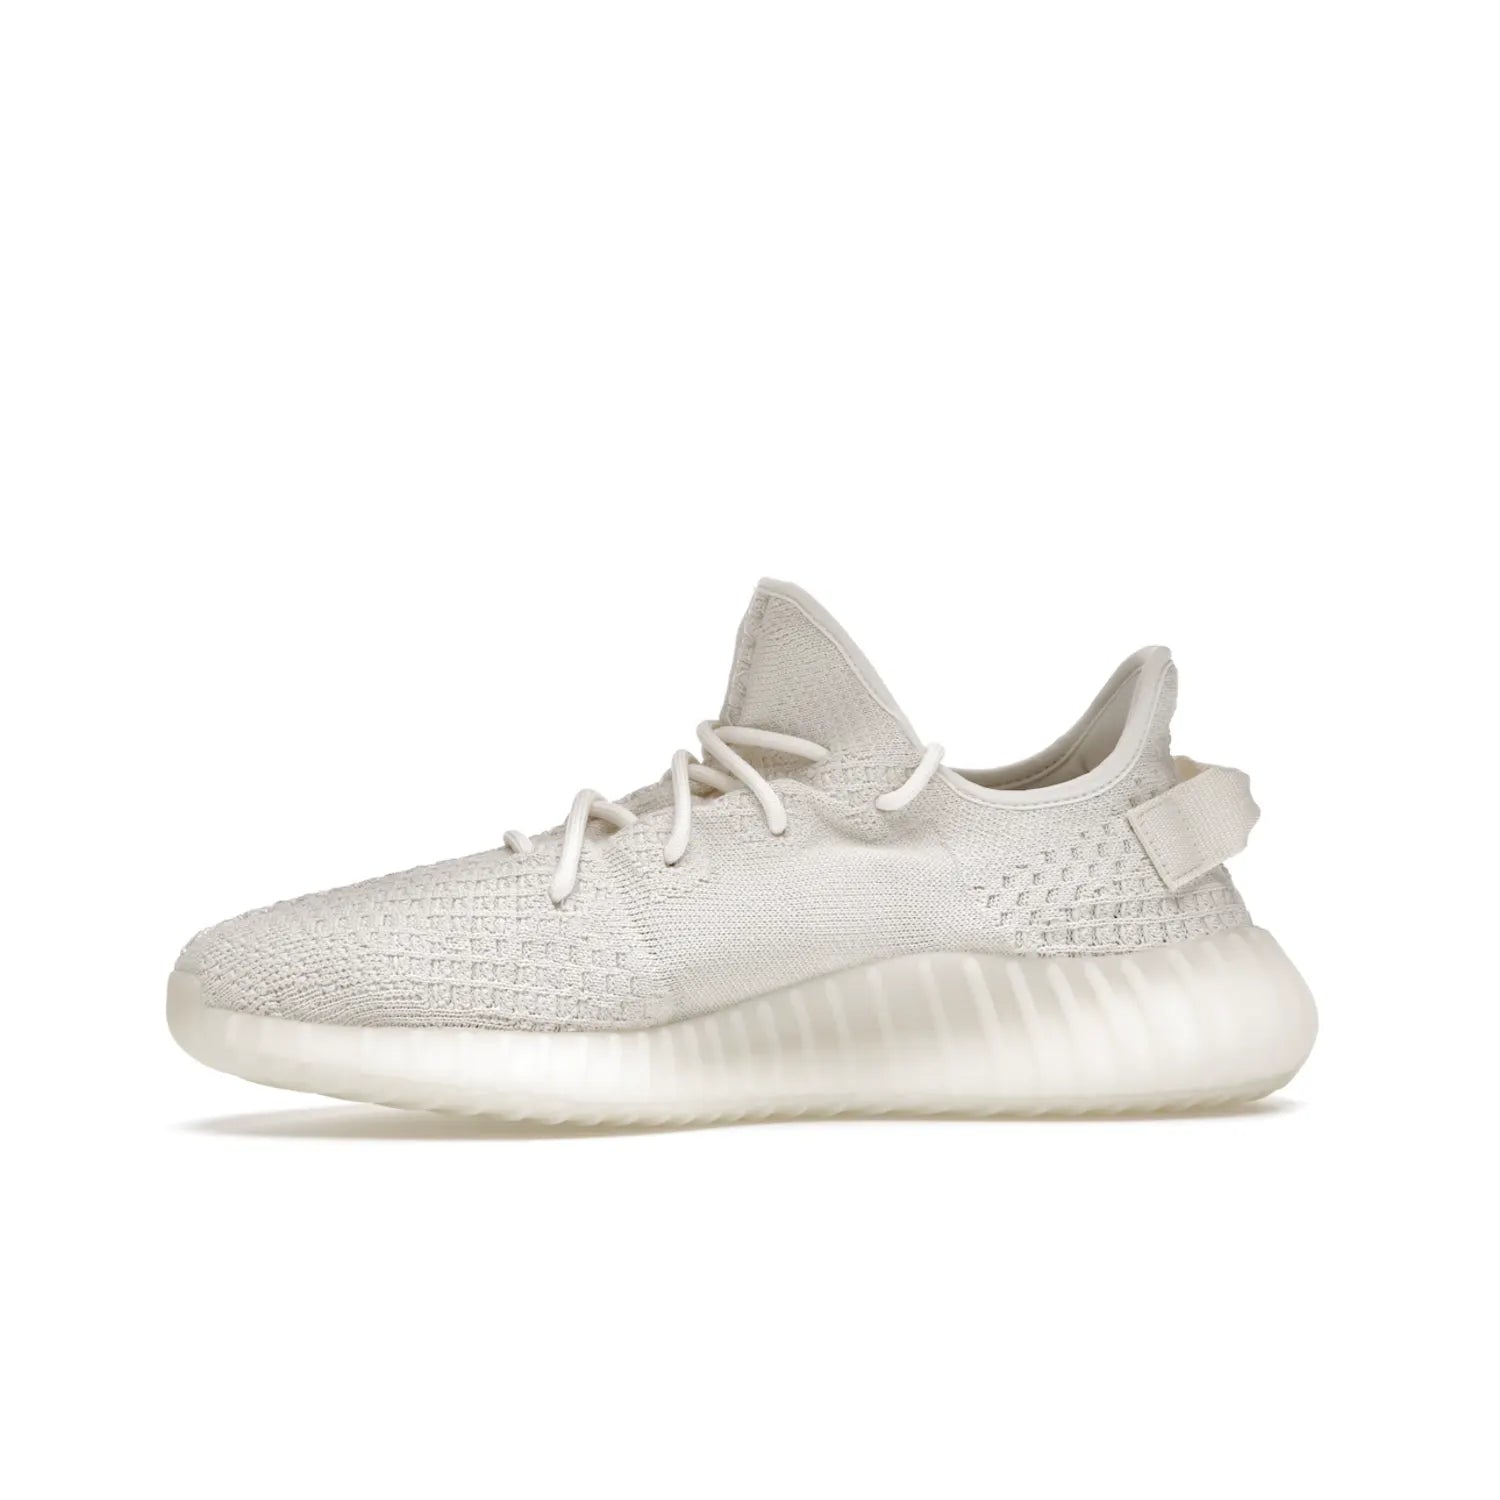 adidas Yeezy Boost 350 V2 Bone - Image 18 - Only at www.BallersClubKickz.com - Grab the stylish and comfortable adidas Yeezy Boost 350 V2 Bone in March 2022. This sneaker features a triple white Primeknit upper, mesh side stripes and canvas heel tabs, sitting atop a semi-translucent sole with Boost technology. Sure to keep your feet comfortable and stylish!